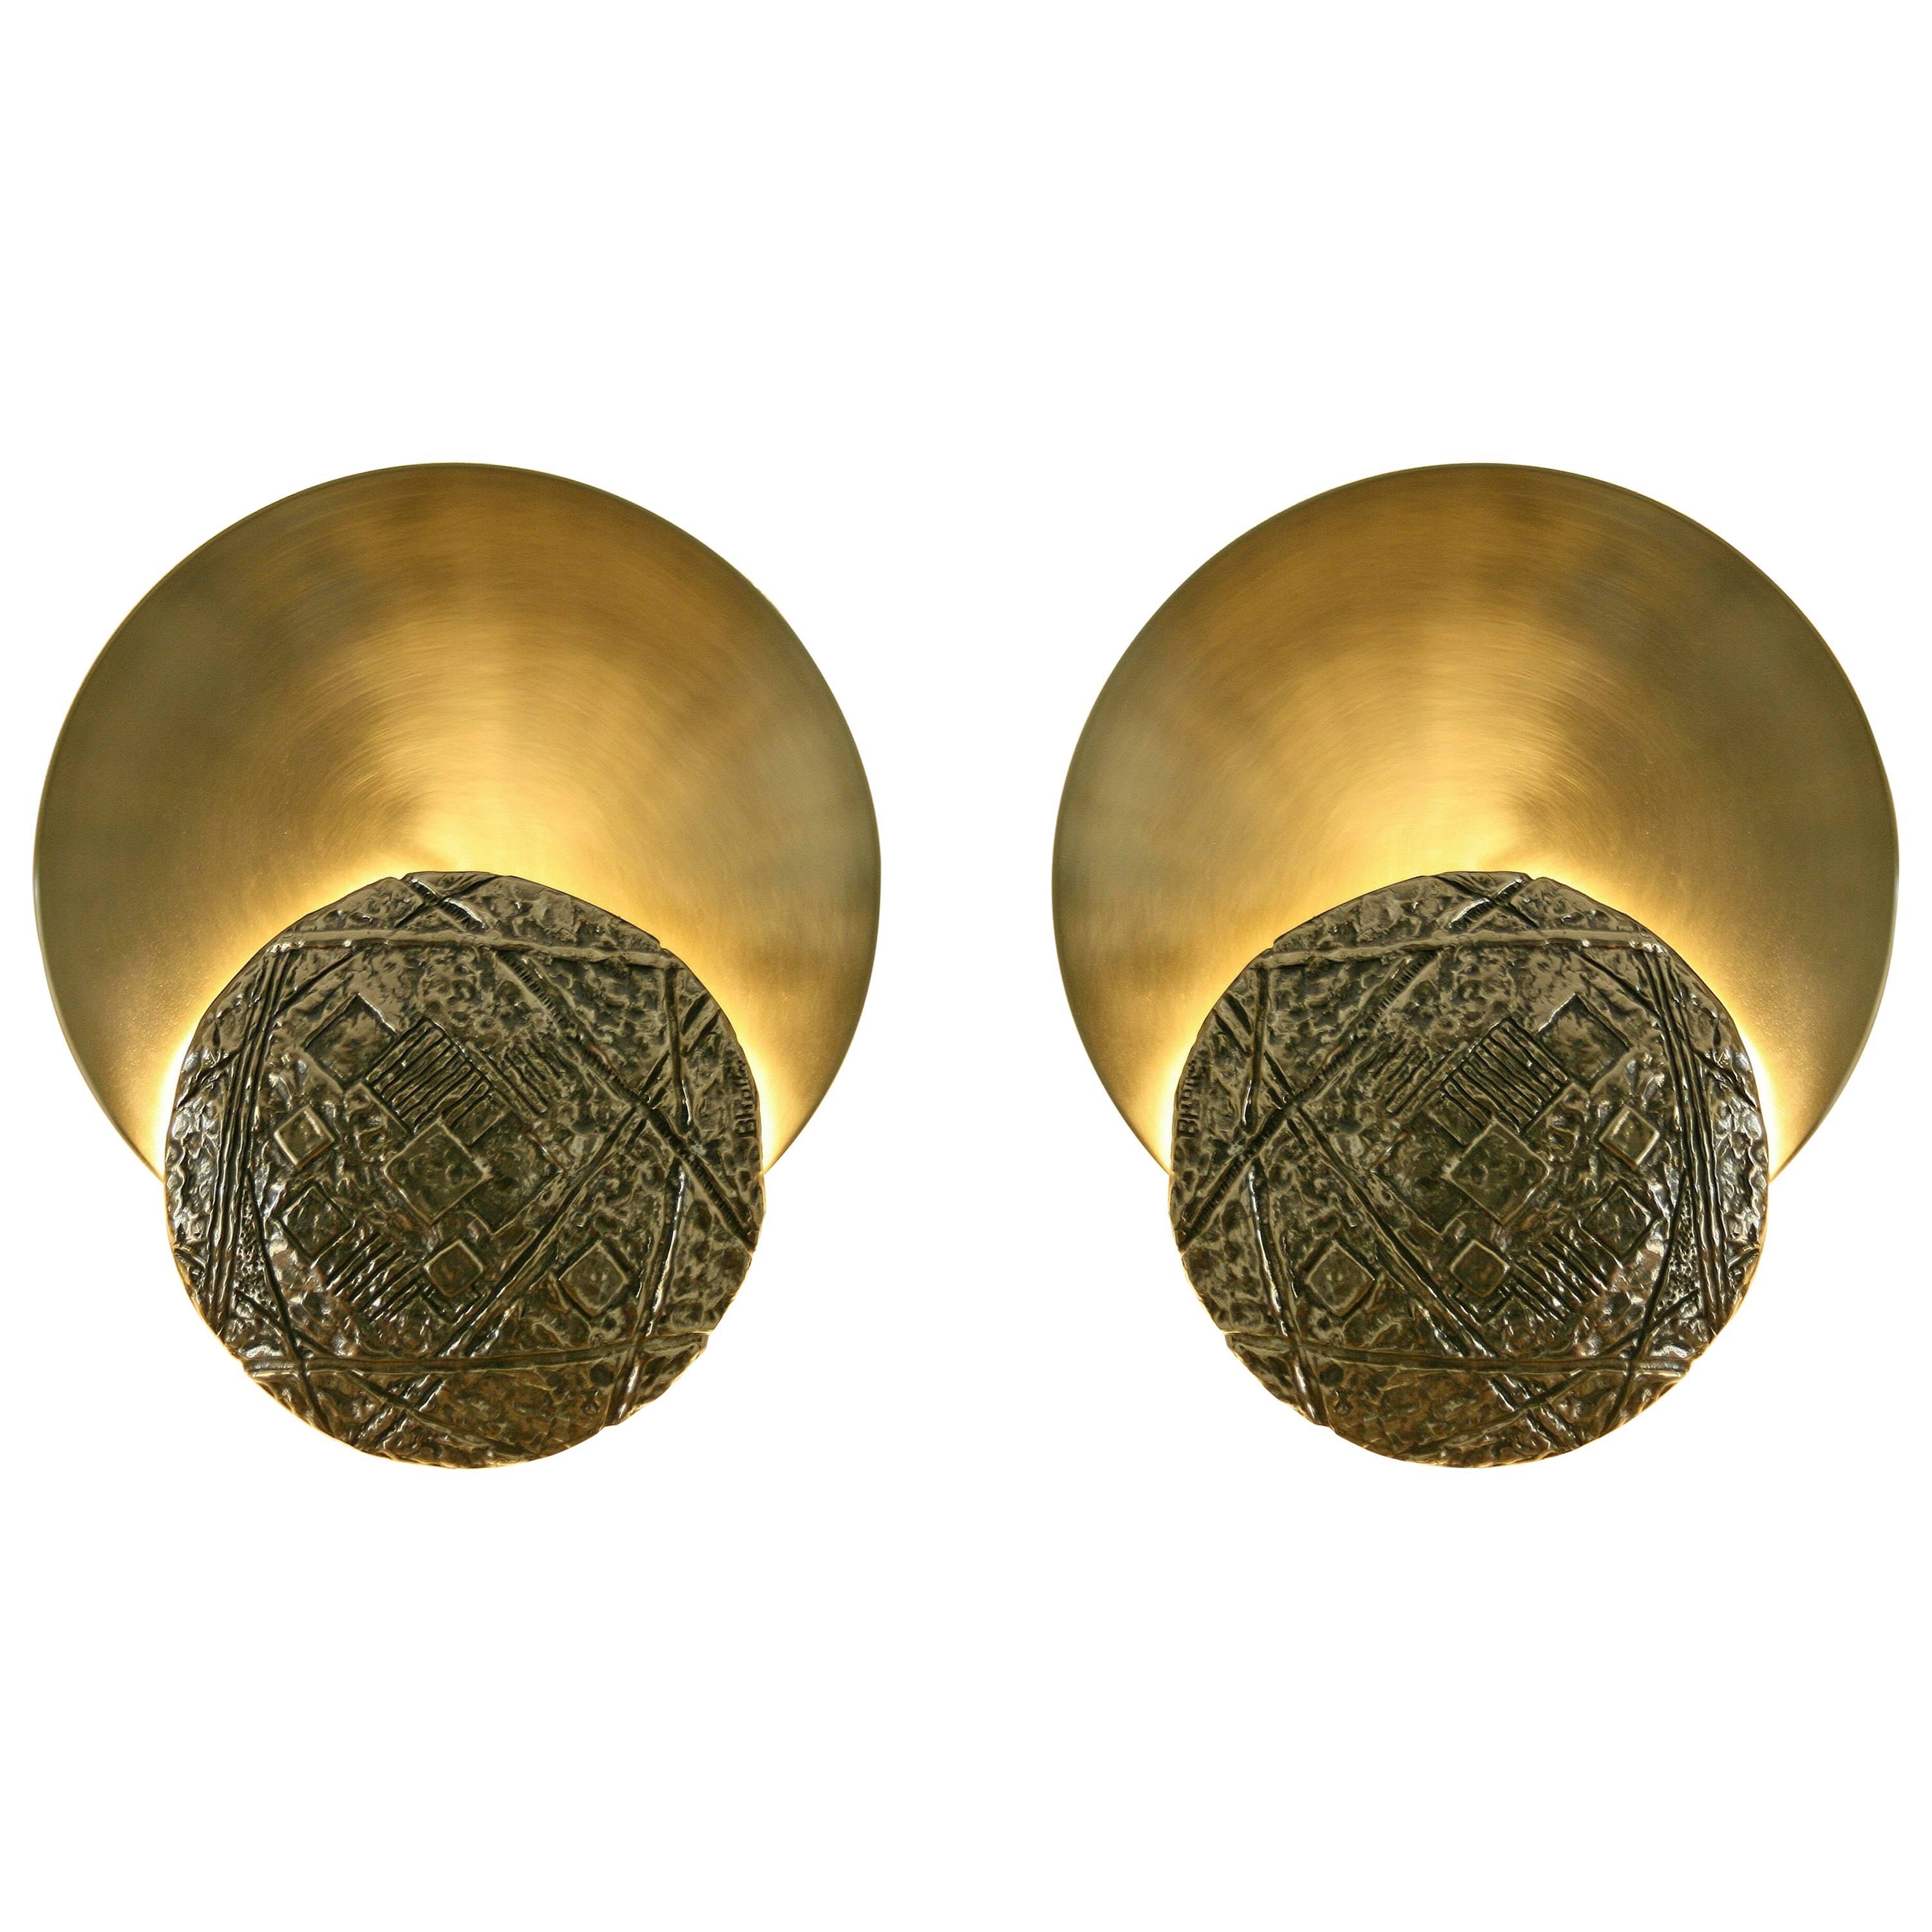 Pair of "Gong" Applique, Brass Casting and Satin Brass, Esperia, Italy, 2016 For Sale